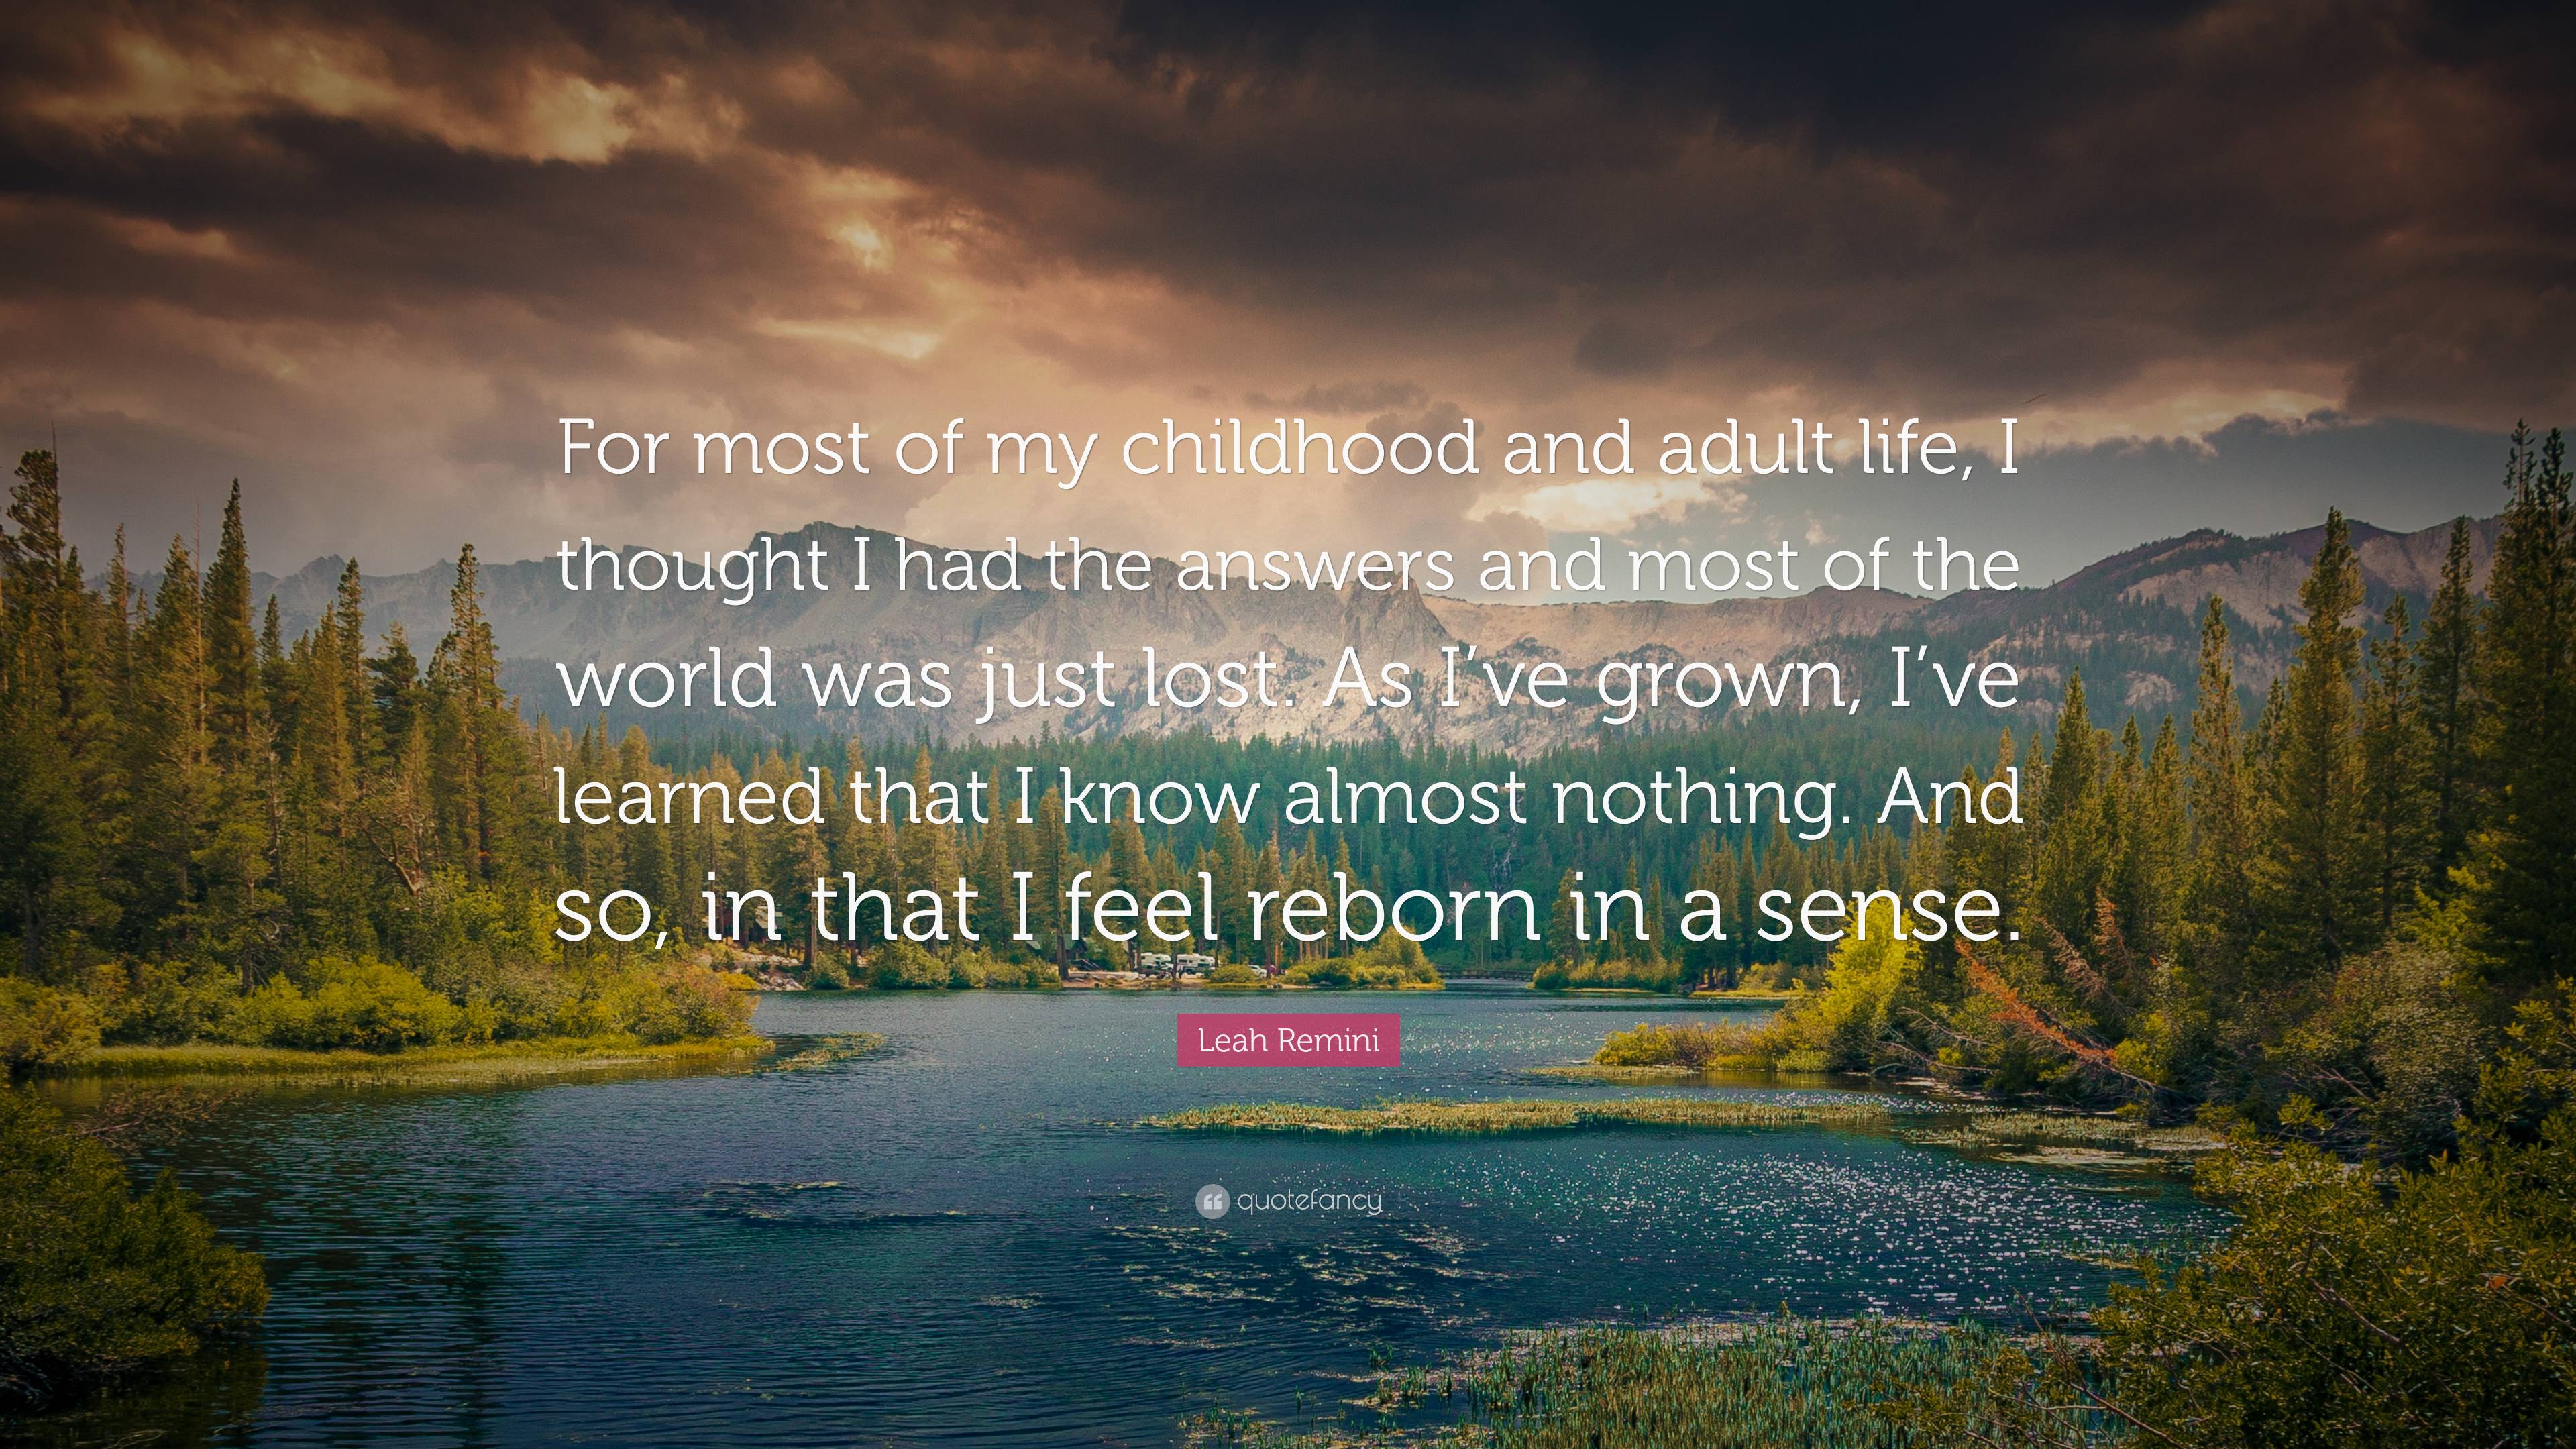 Leah Remini Quote: “For most of my childhood and adult life, I thought ...